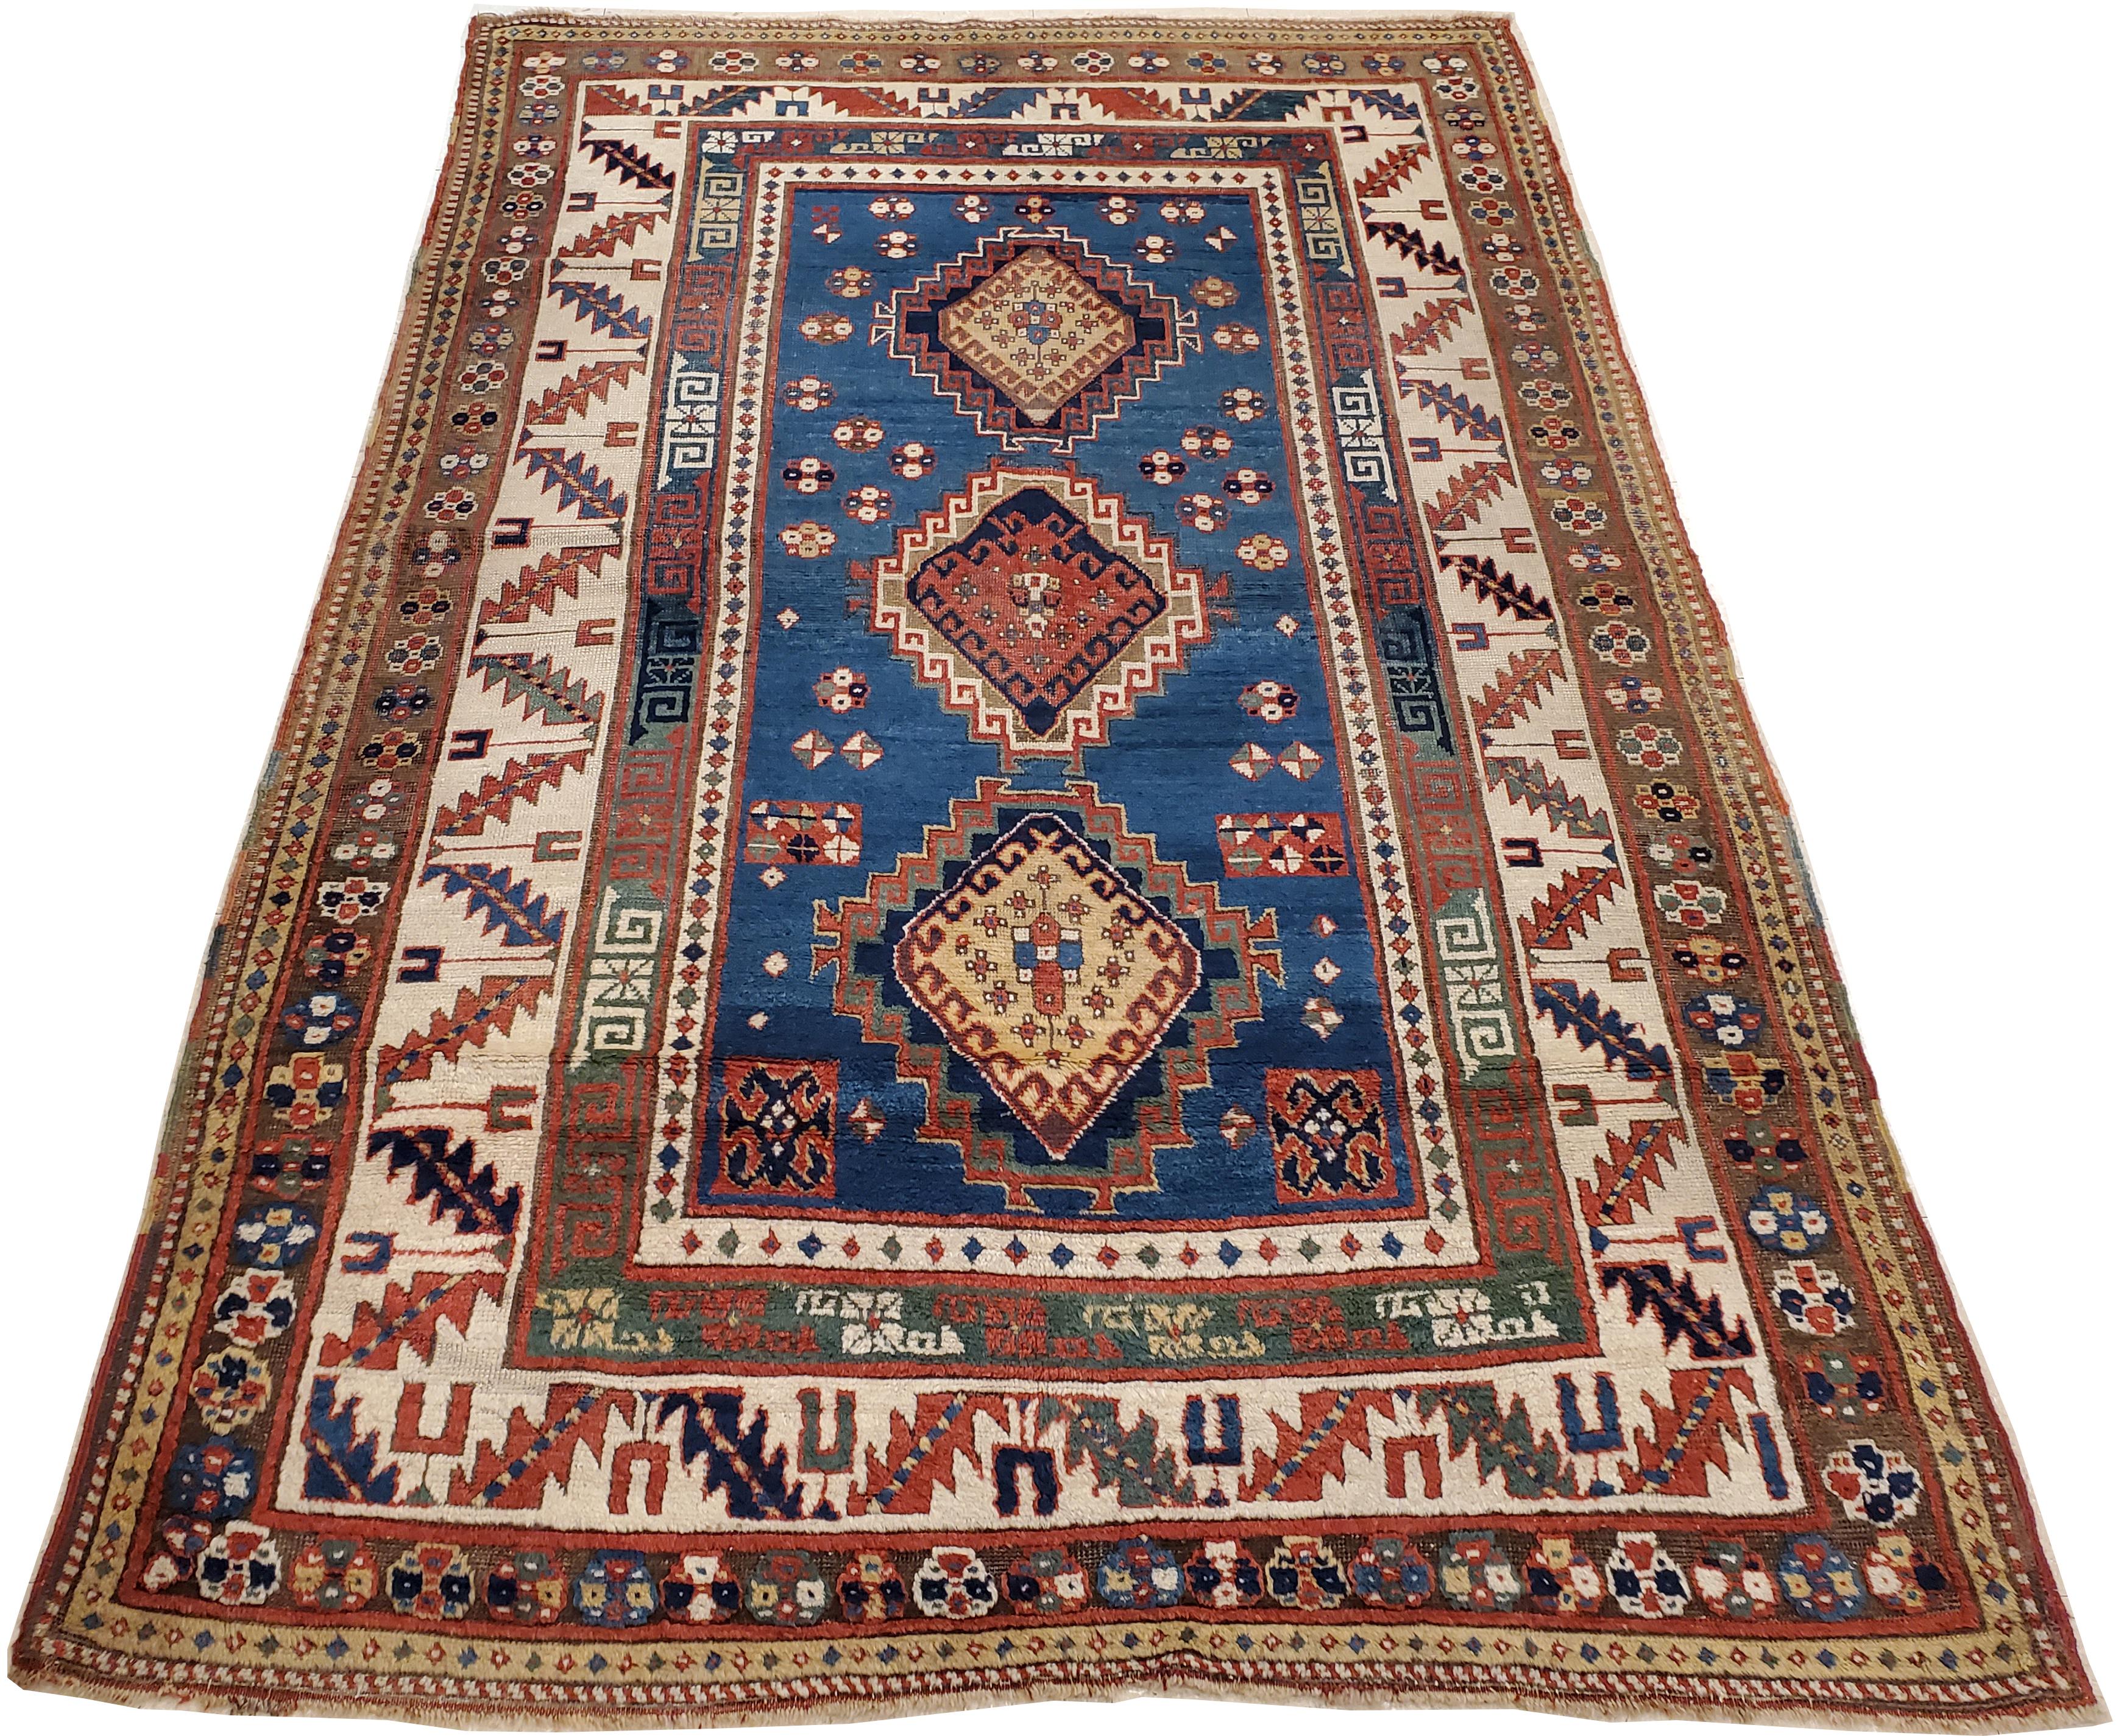 Antique Kazak Carpet, Handmade Wool, Rust, Ivory, Navy, Light Blue and Gold In Good Condition For Sale In Port Washington, NY